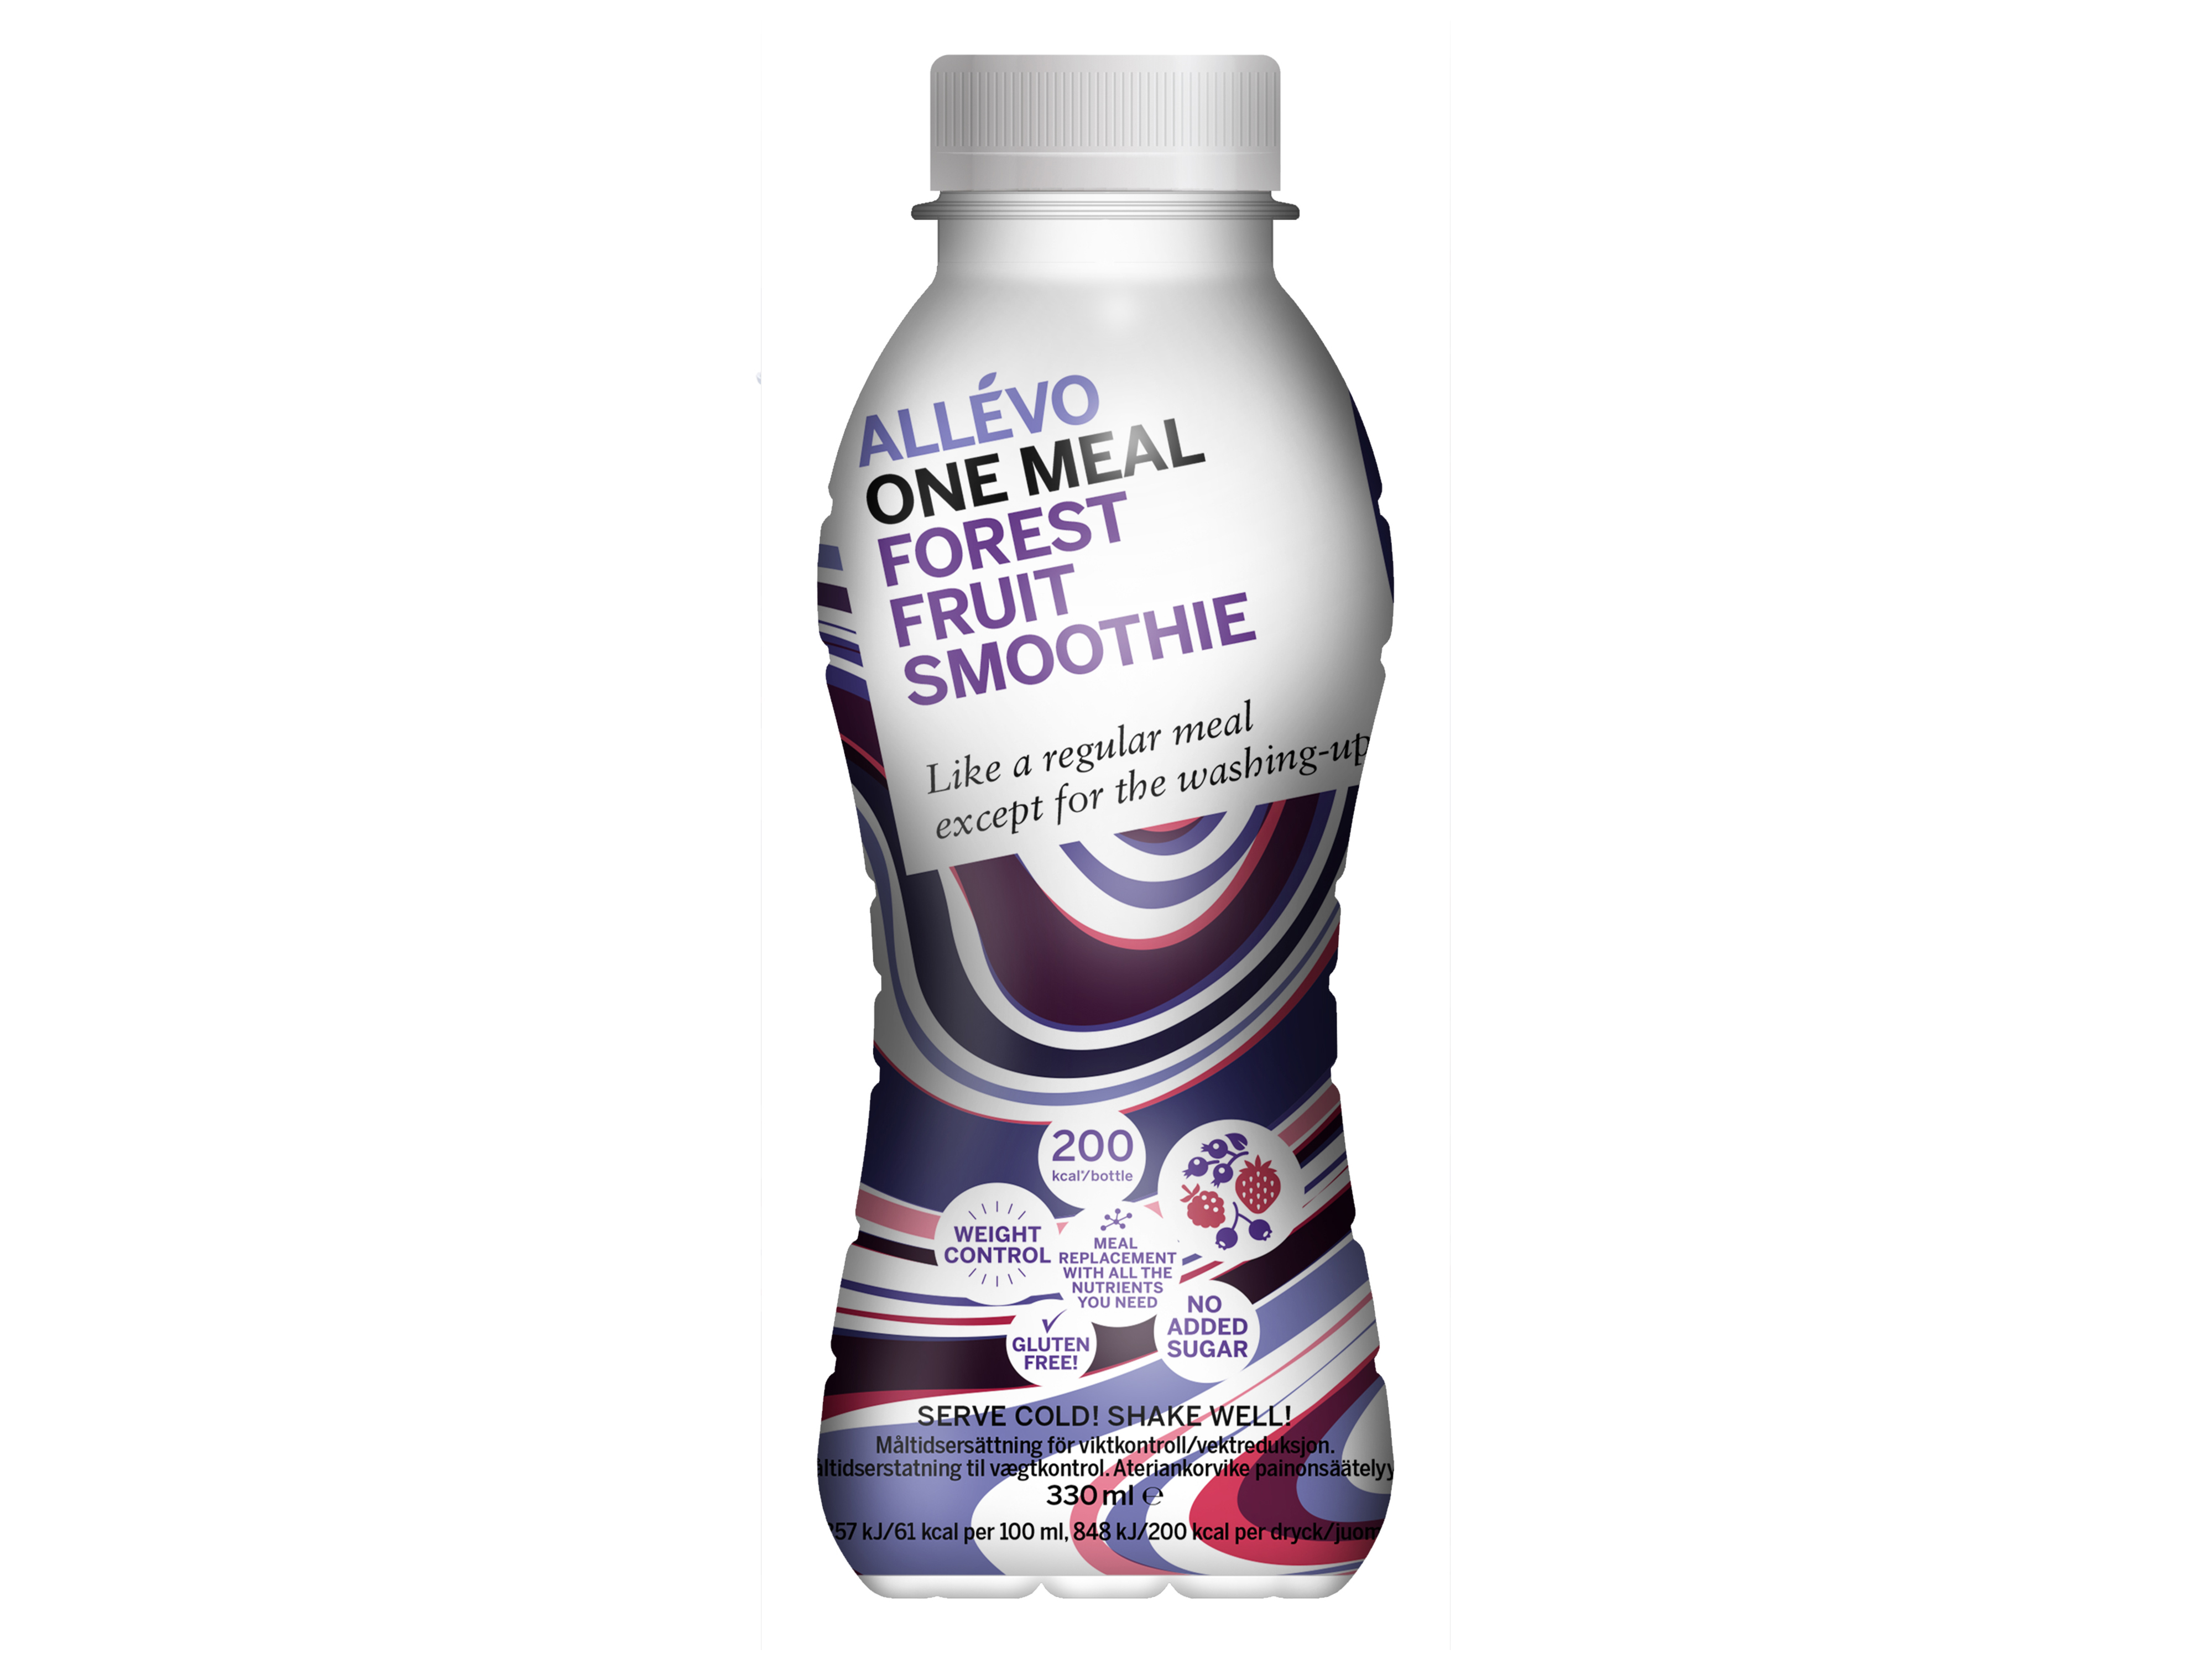 Allevo One Meal Smoothie Forest Fruit, Forest Fruit, Ready to drink, 330 ml, 12 stk.